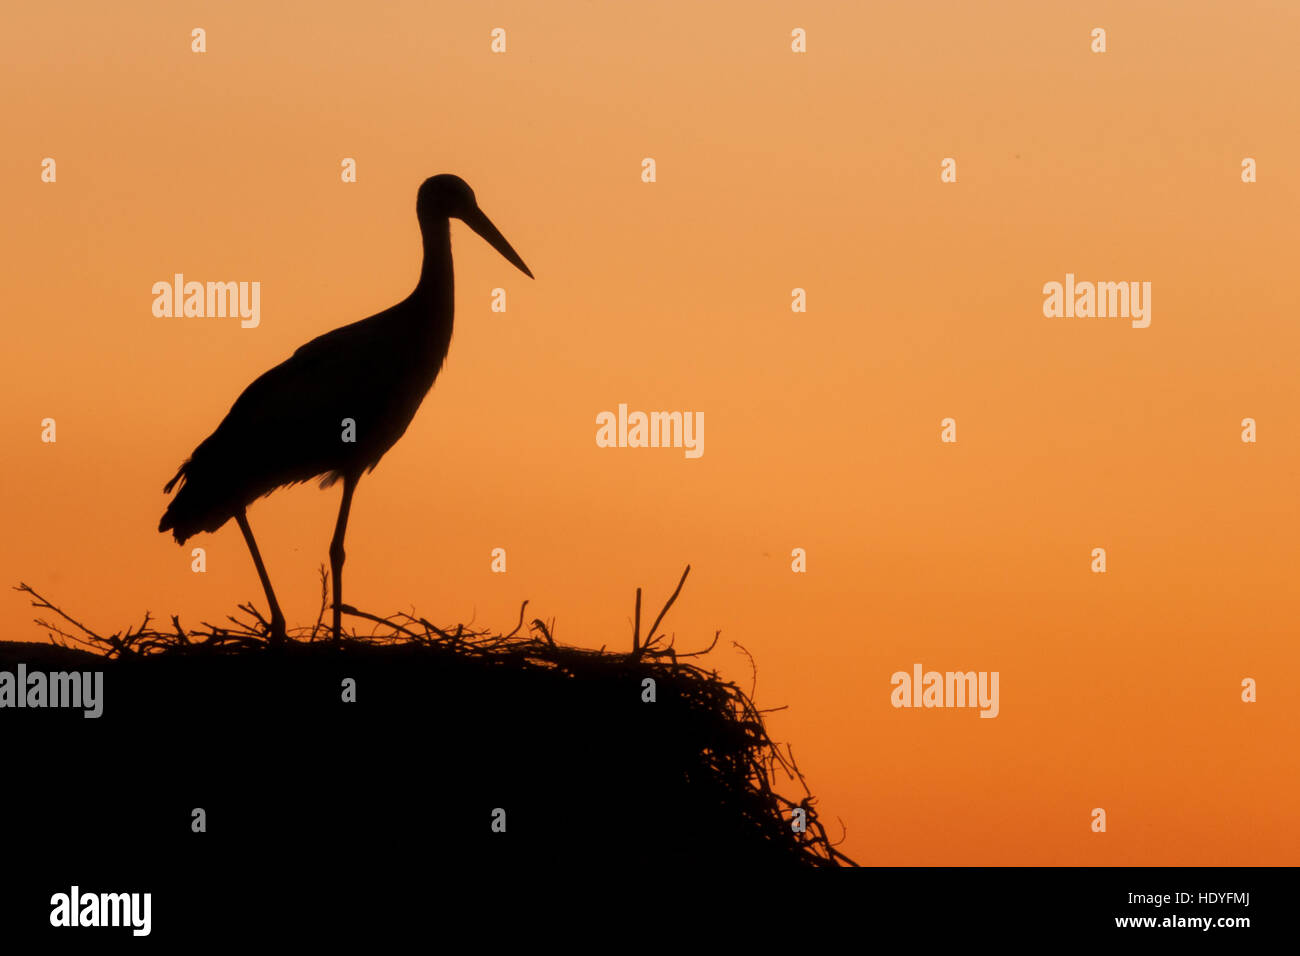 Silhouette of a stork in the nest with a nice orange sky background Stock Photo